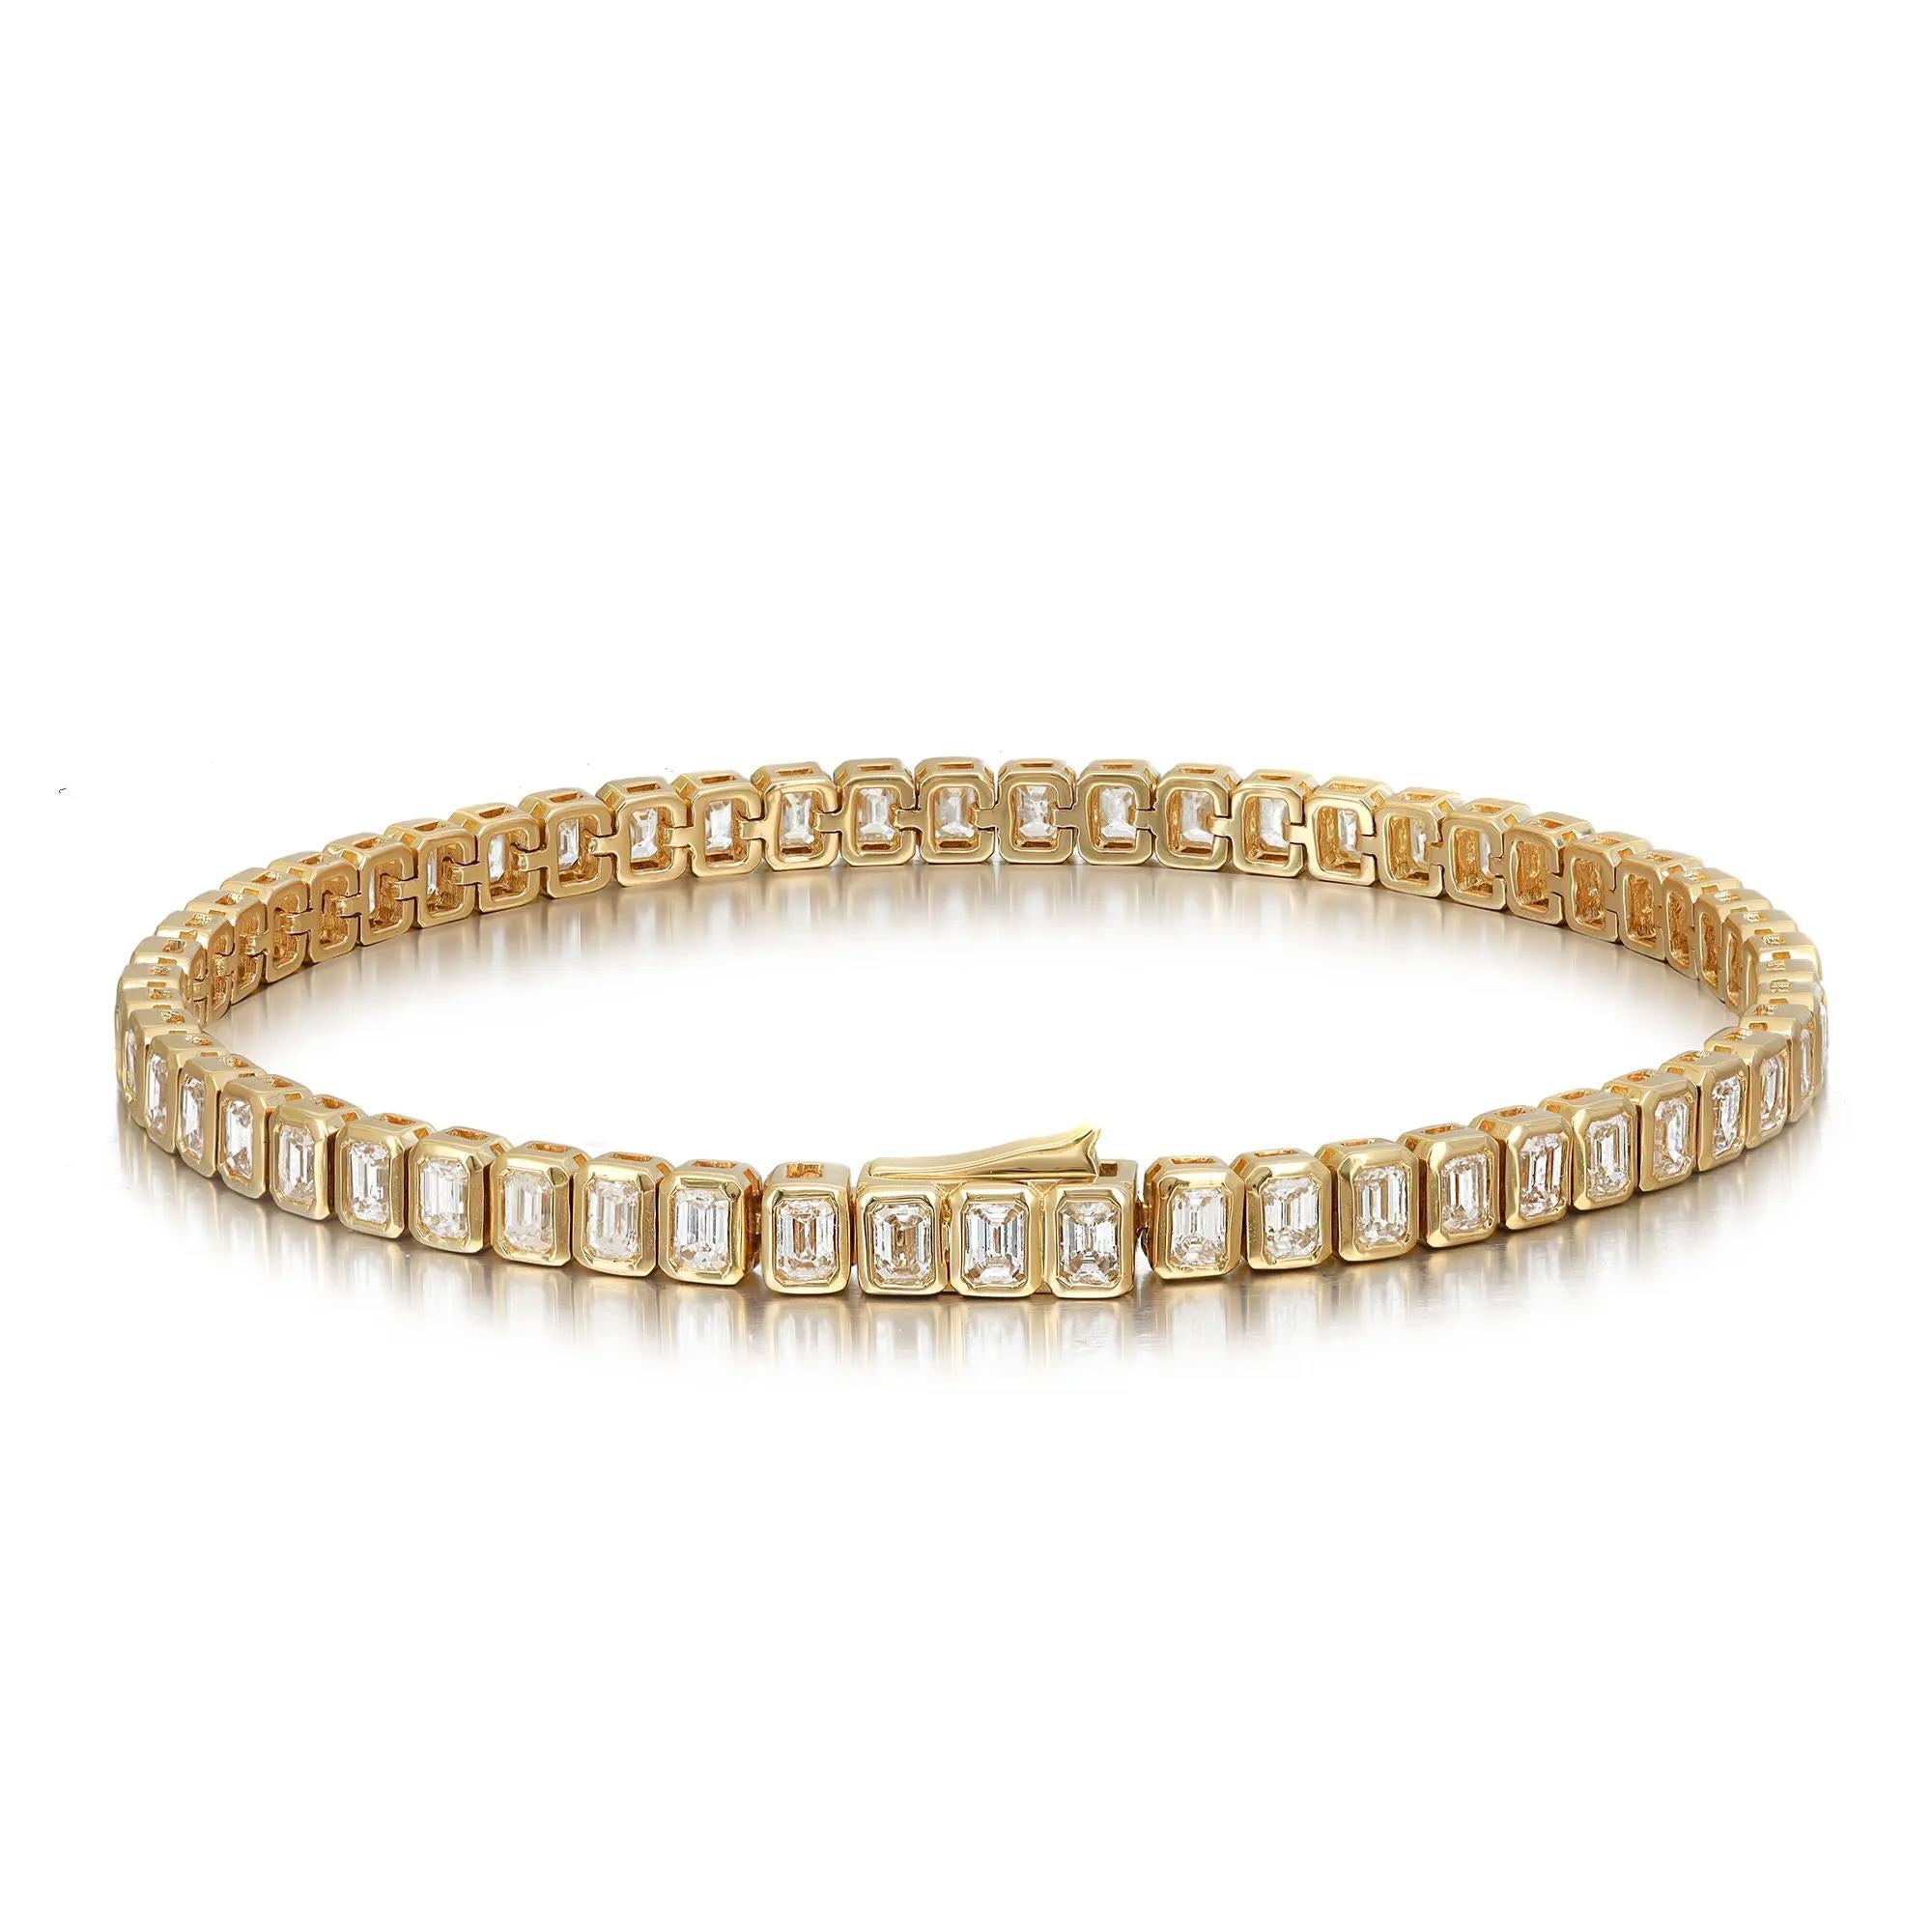 Classic yet elegant, this breathtaking diamond tennis bracelet is crafted in 18K yellow gold with 56 bezel set dazzling emerald cut diamonds. Total diamond weight: 4.84 carats. The bright white diamonds are G-H color and VS-SI clarity. Bracelet